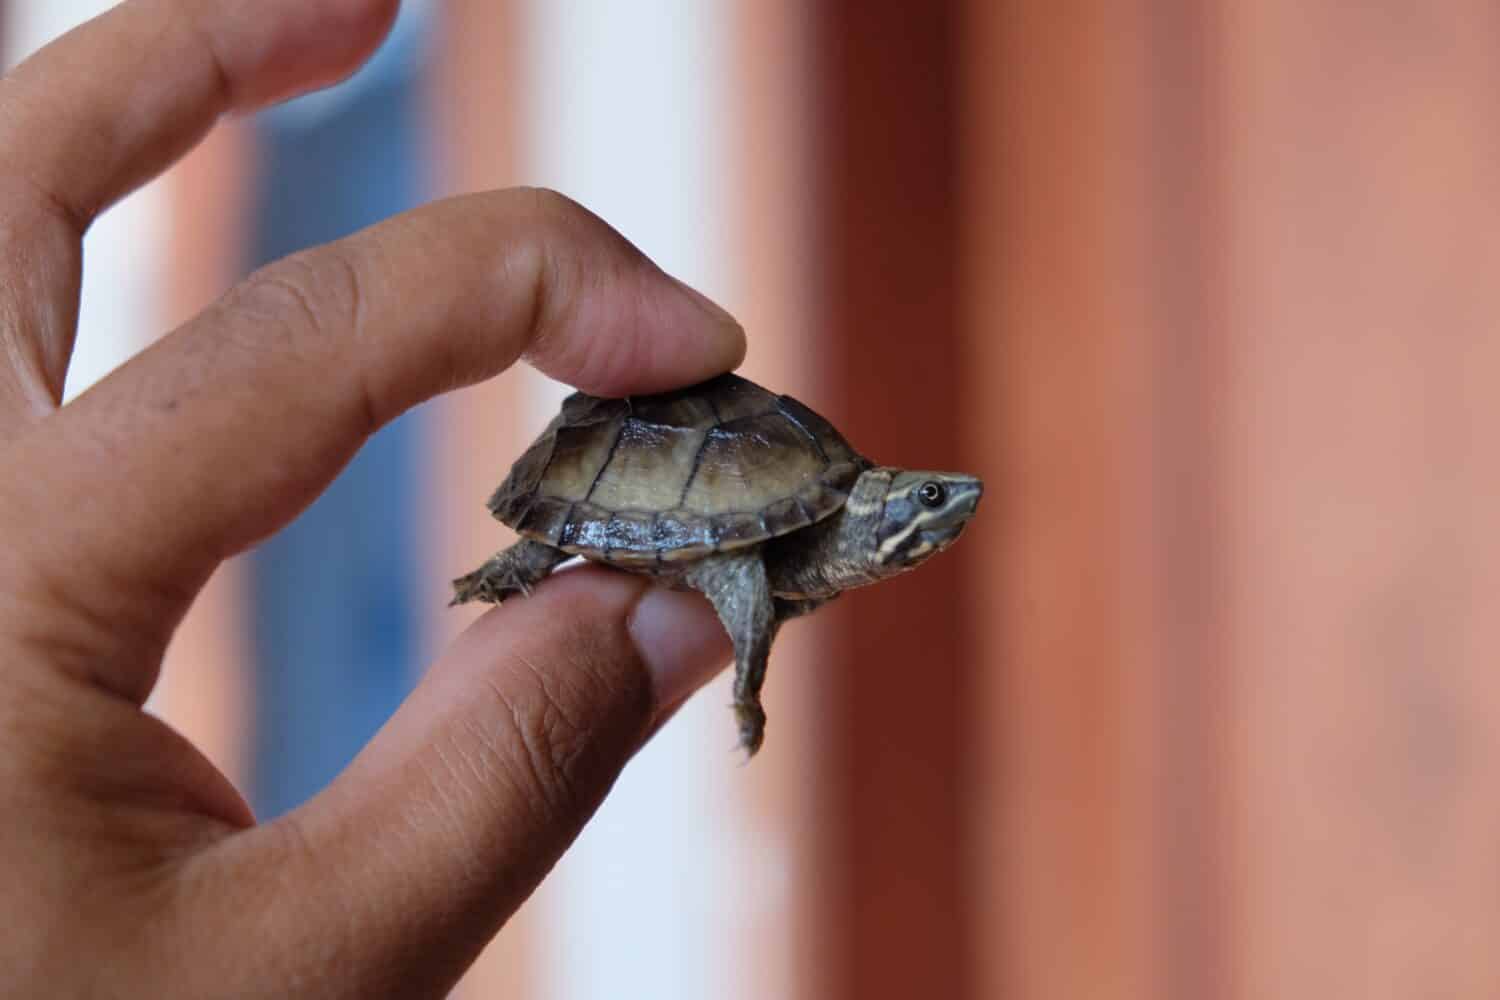 the stinkpot turtle or common musk turtle ( Sternotherus odoratus ) one of smallest turtle on earth finger comparison